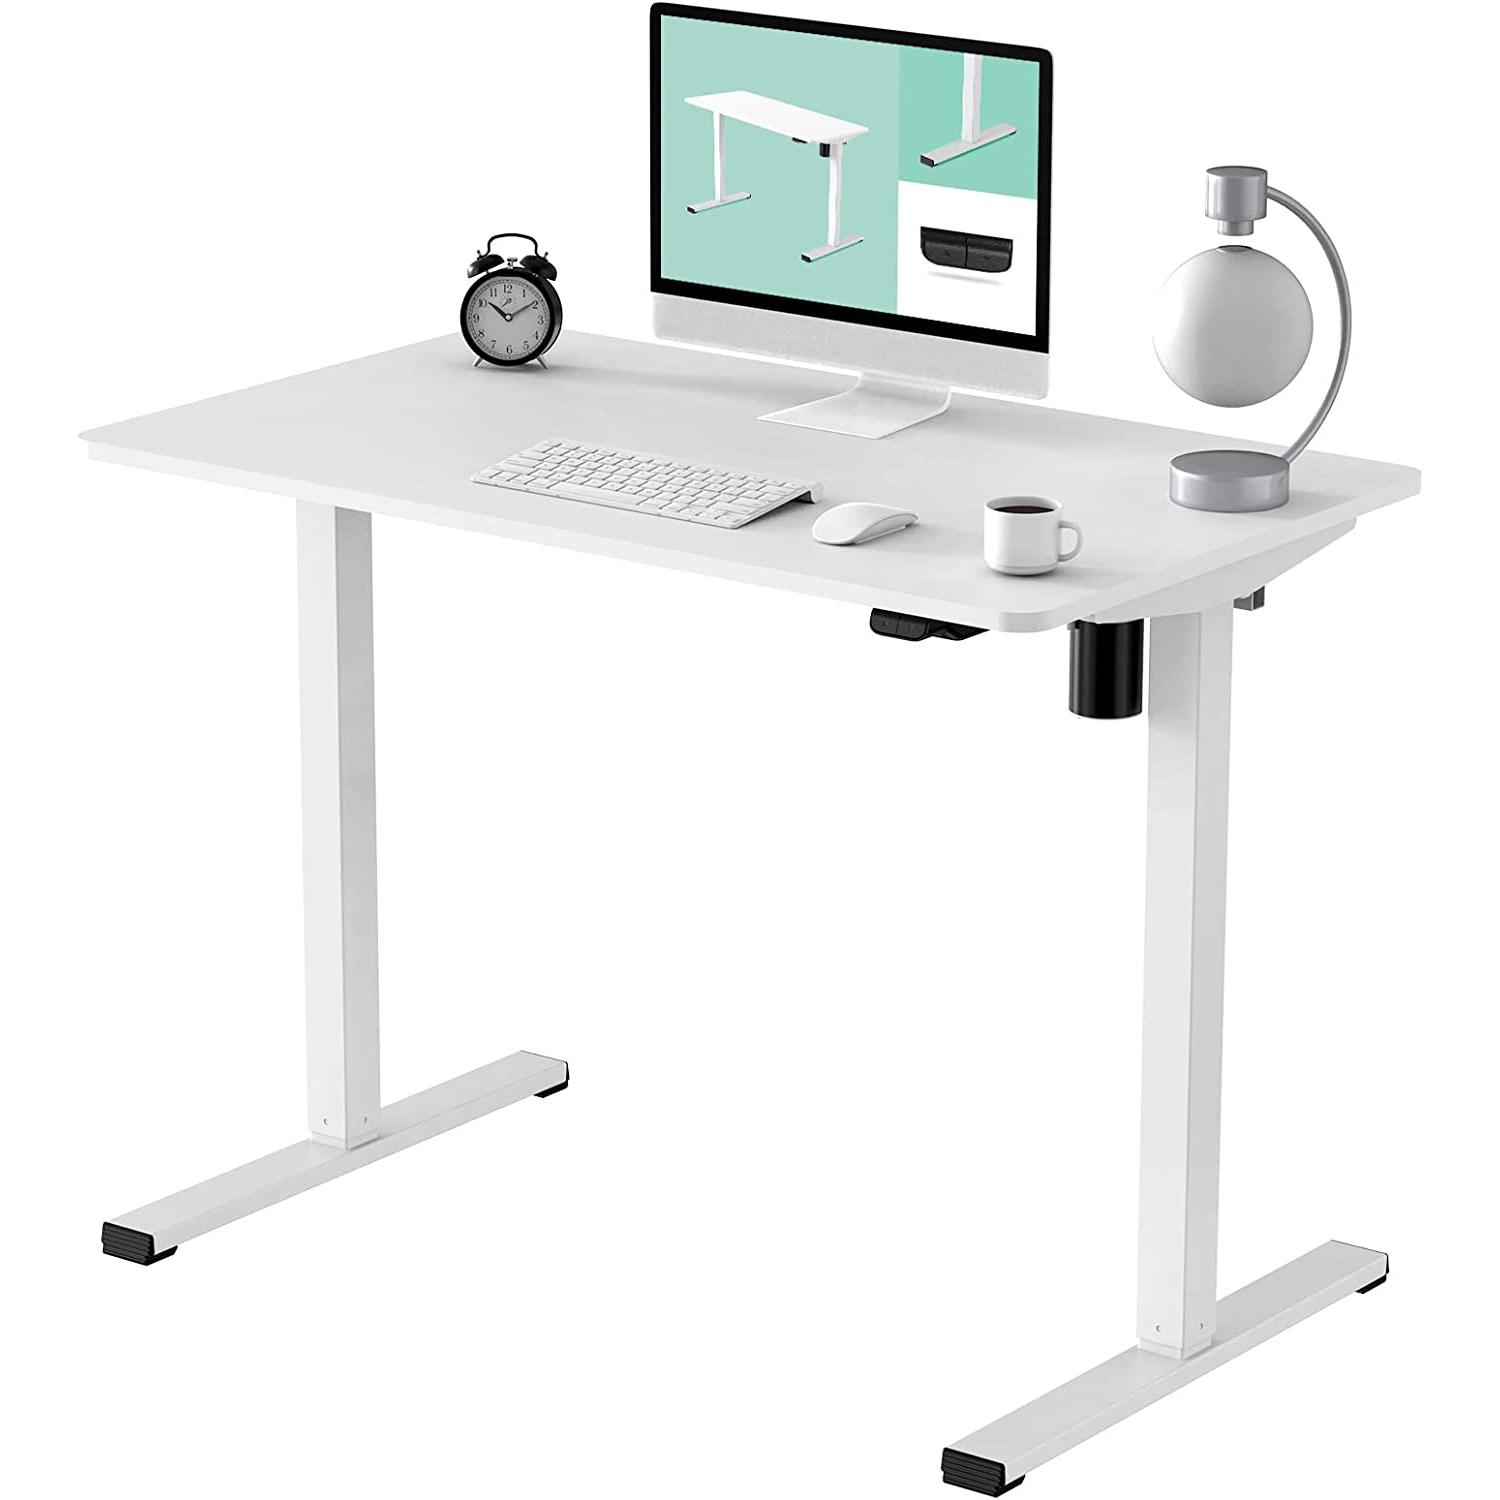 FlexiSpot Height Adjustable Electric Standing Desk White for $117.49 Shipped